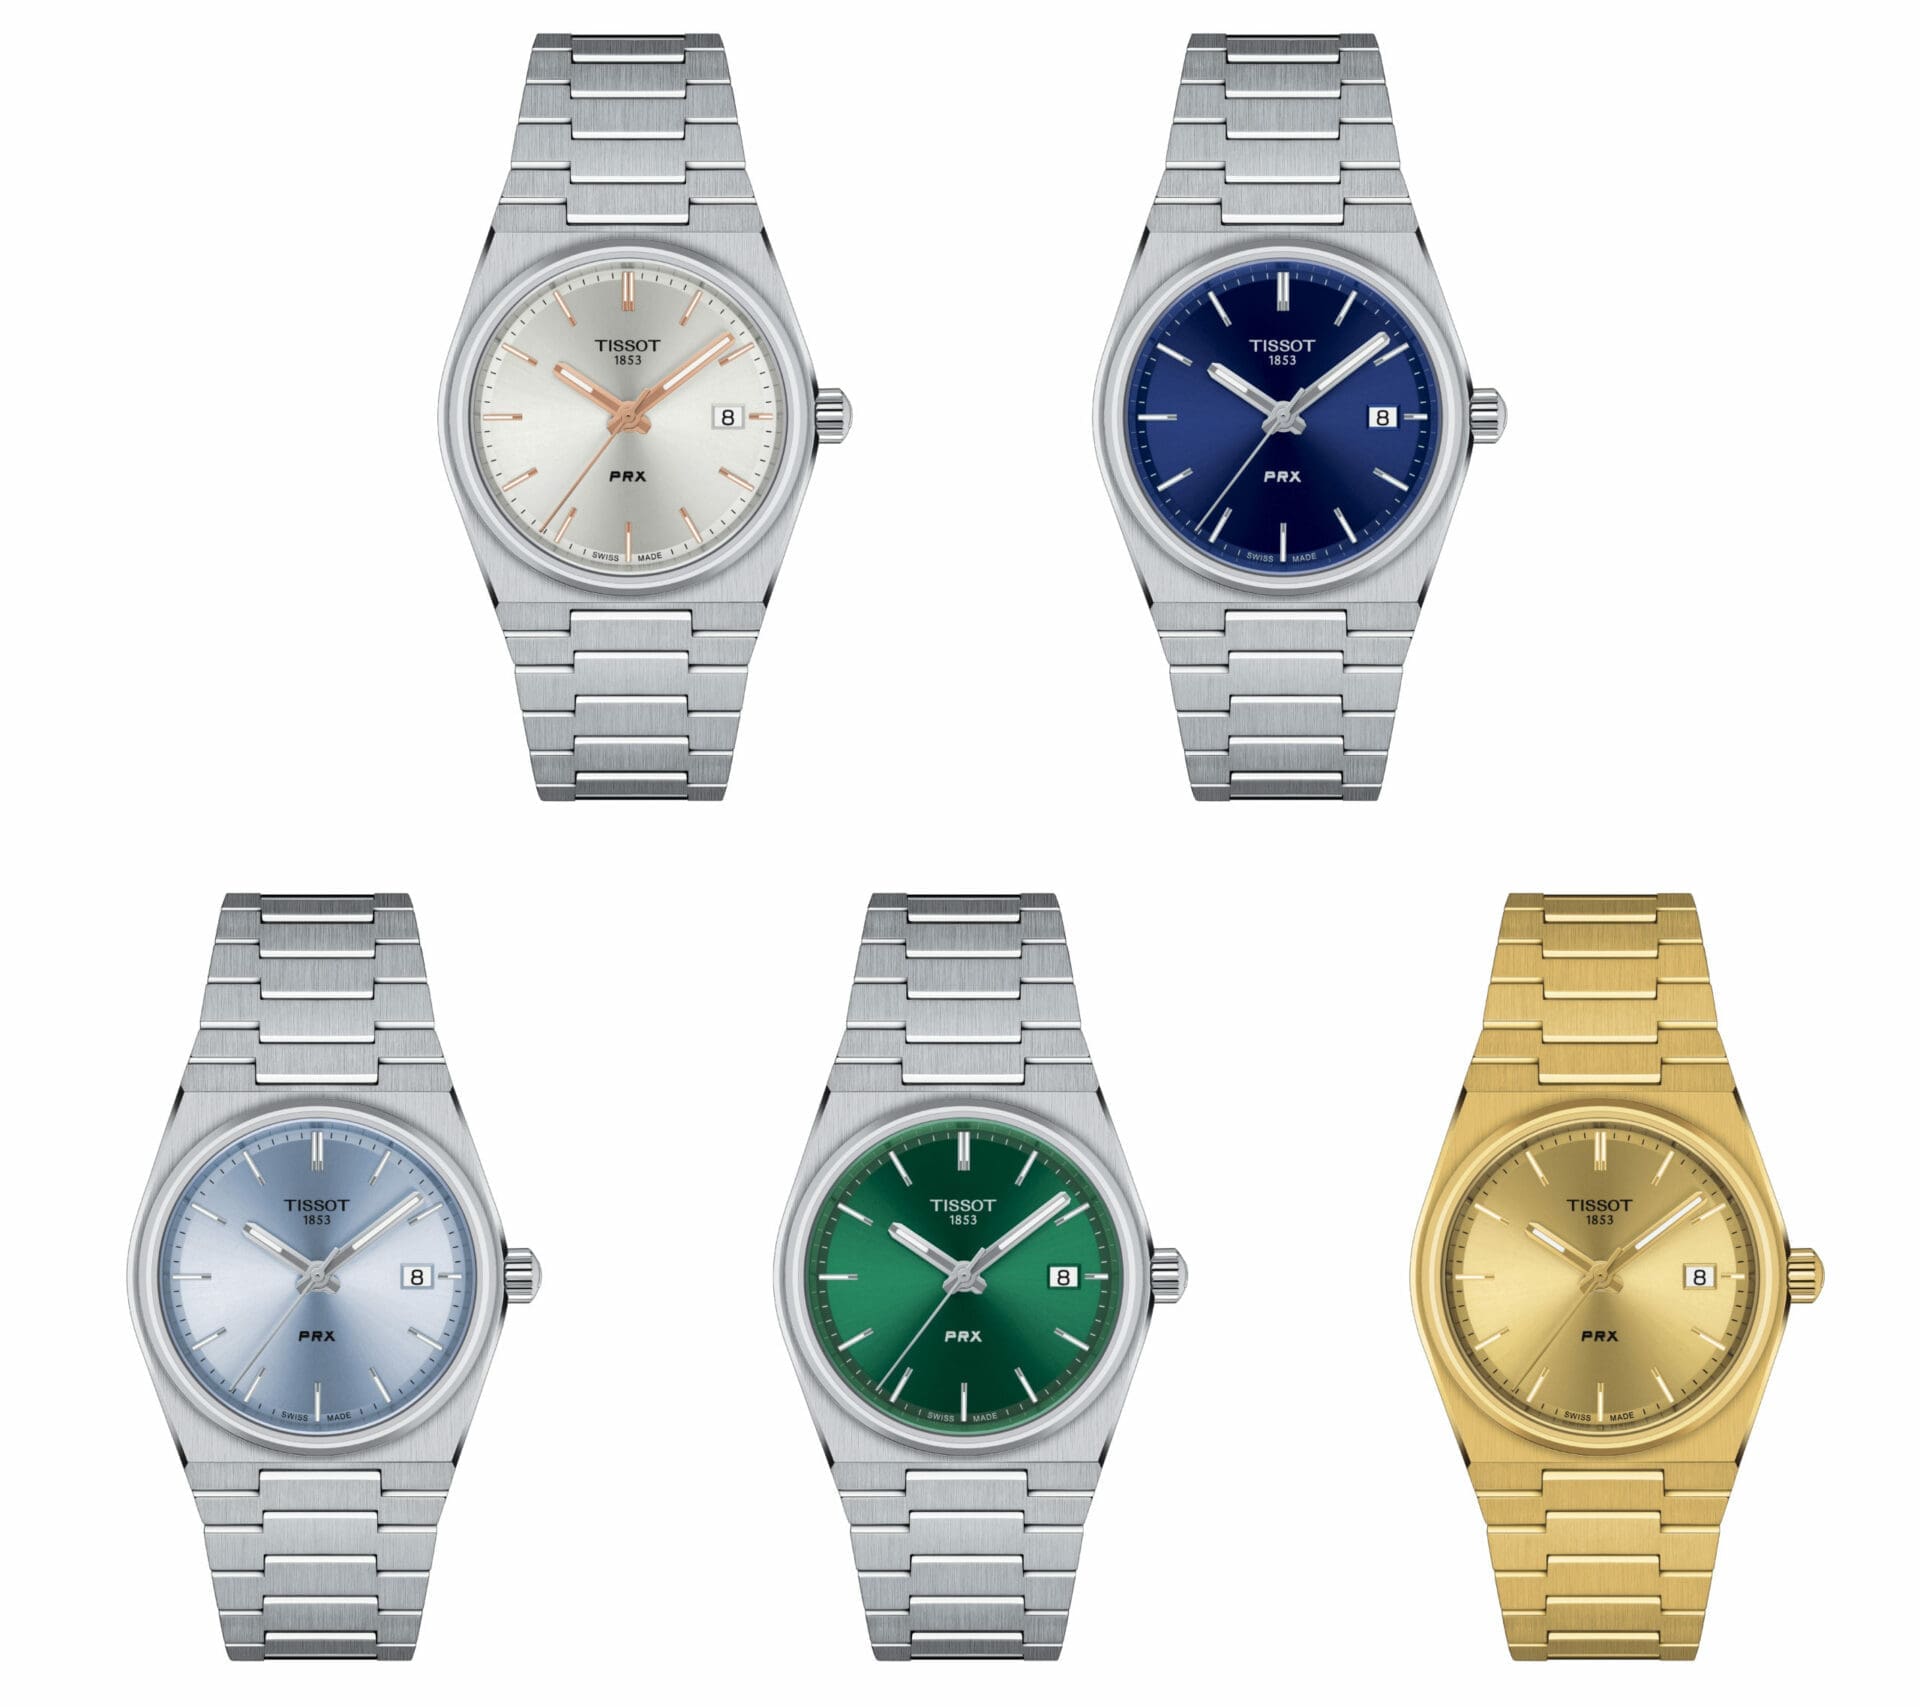 INTRODUCING: Five new Tissot PRX 35mm pieces get a bold new look